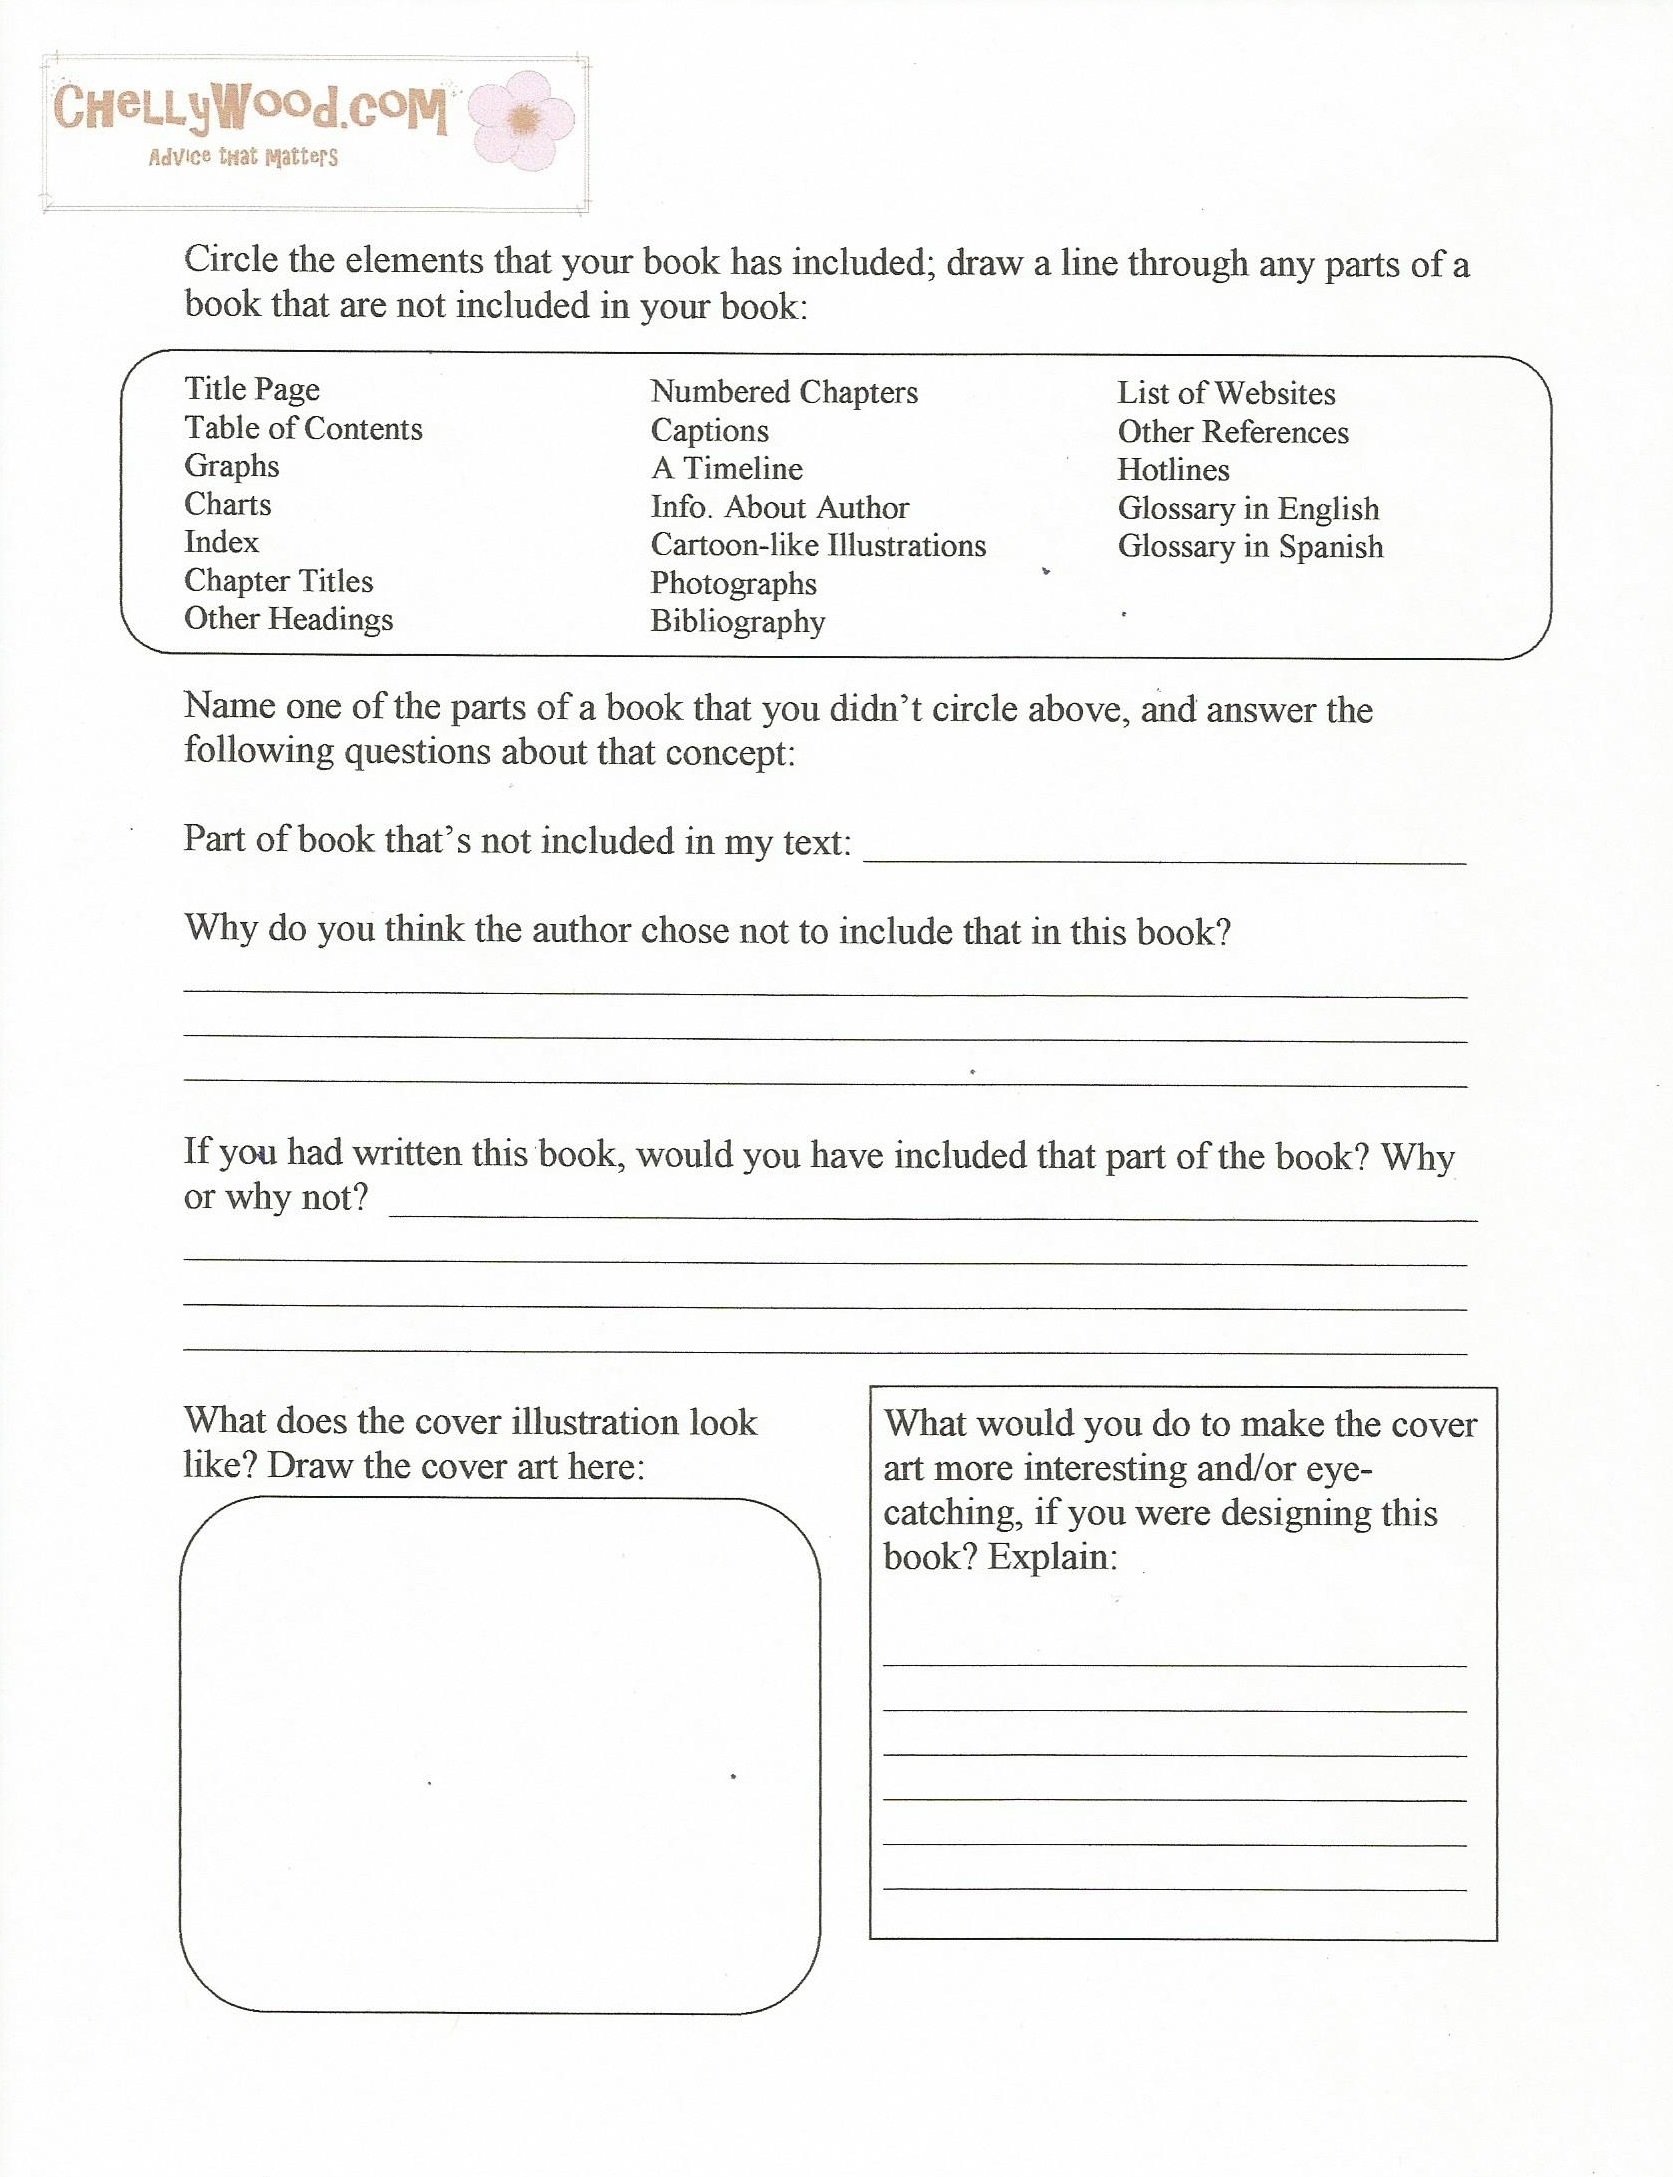 10 Awesome High School Book Report Ideas high school book report template bunch ideas of high school book 2022